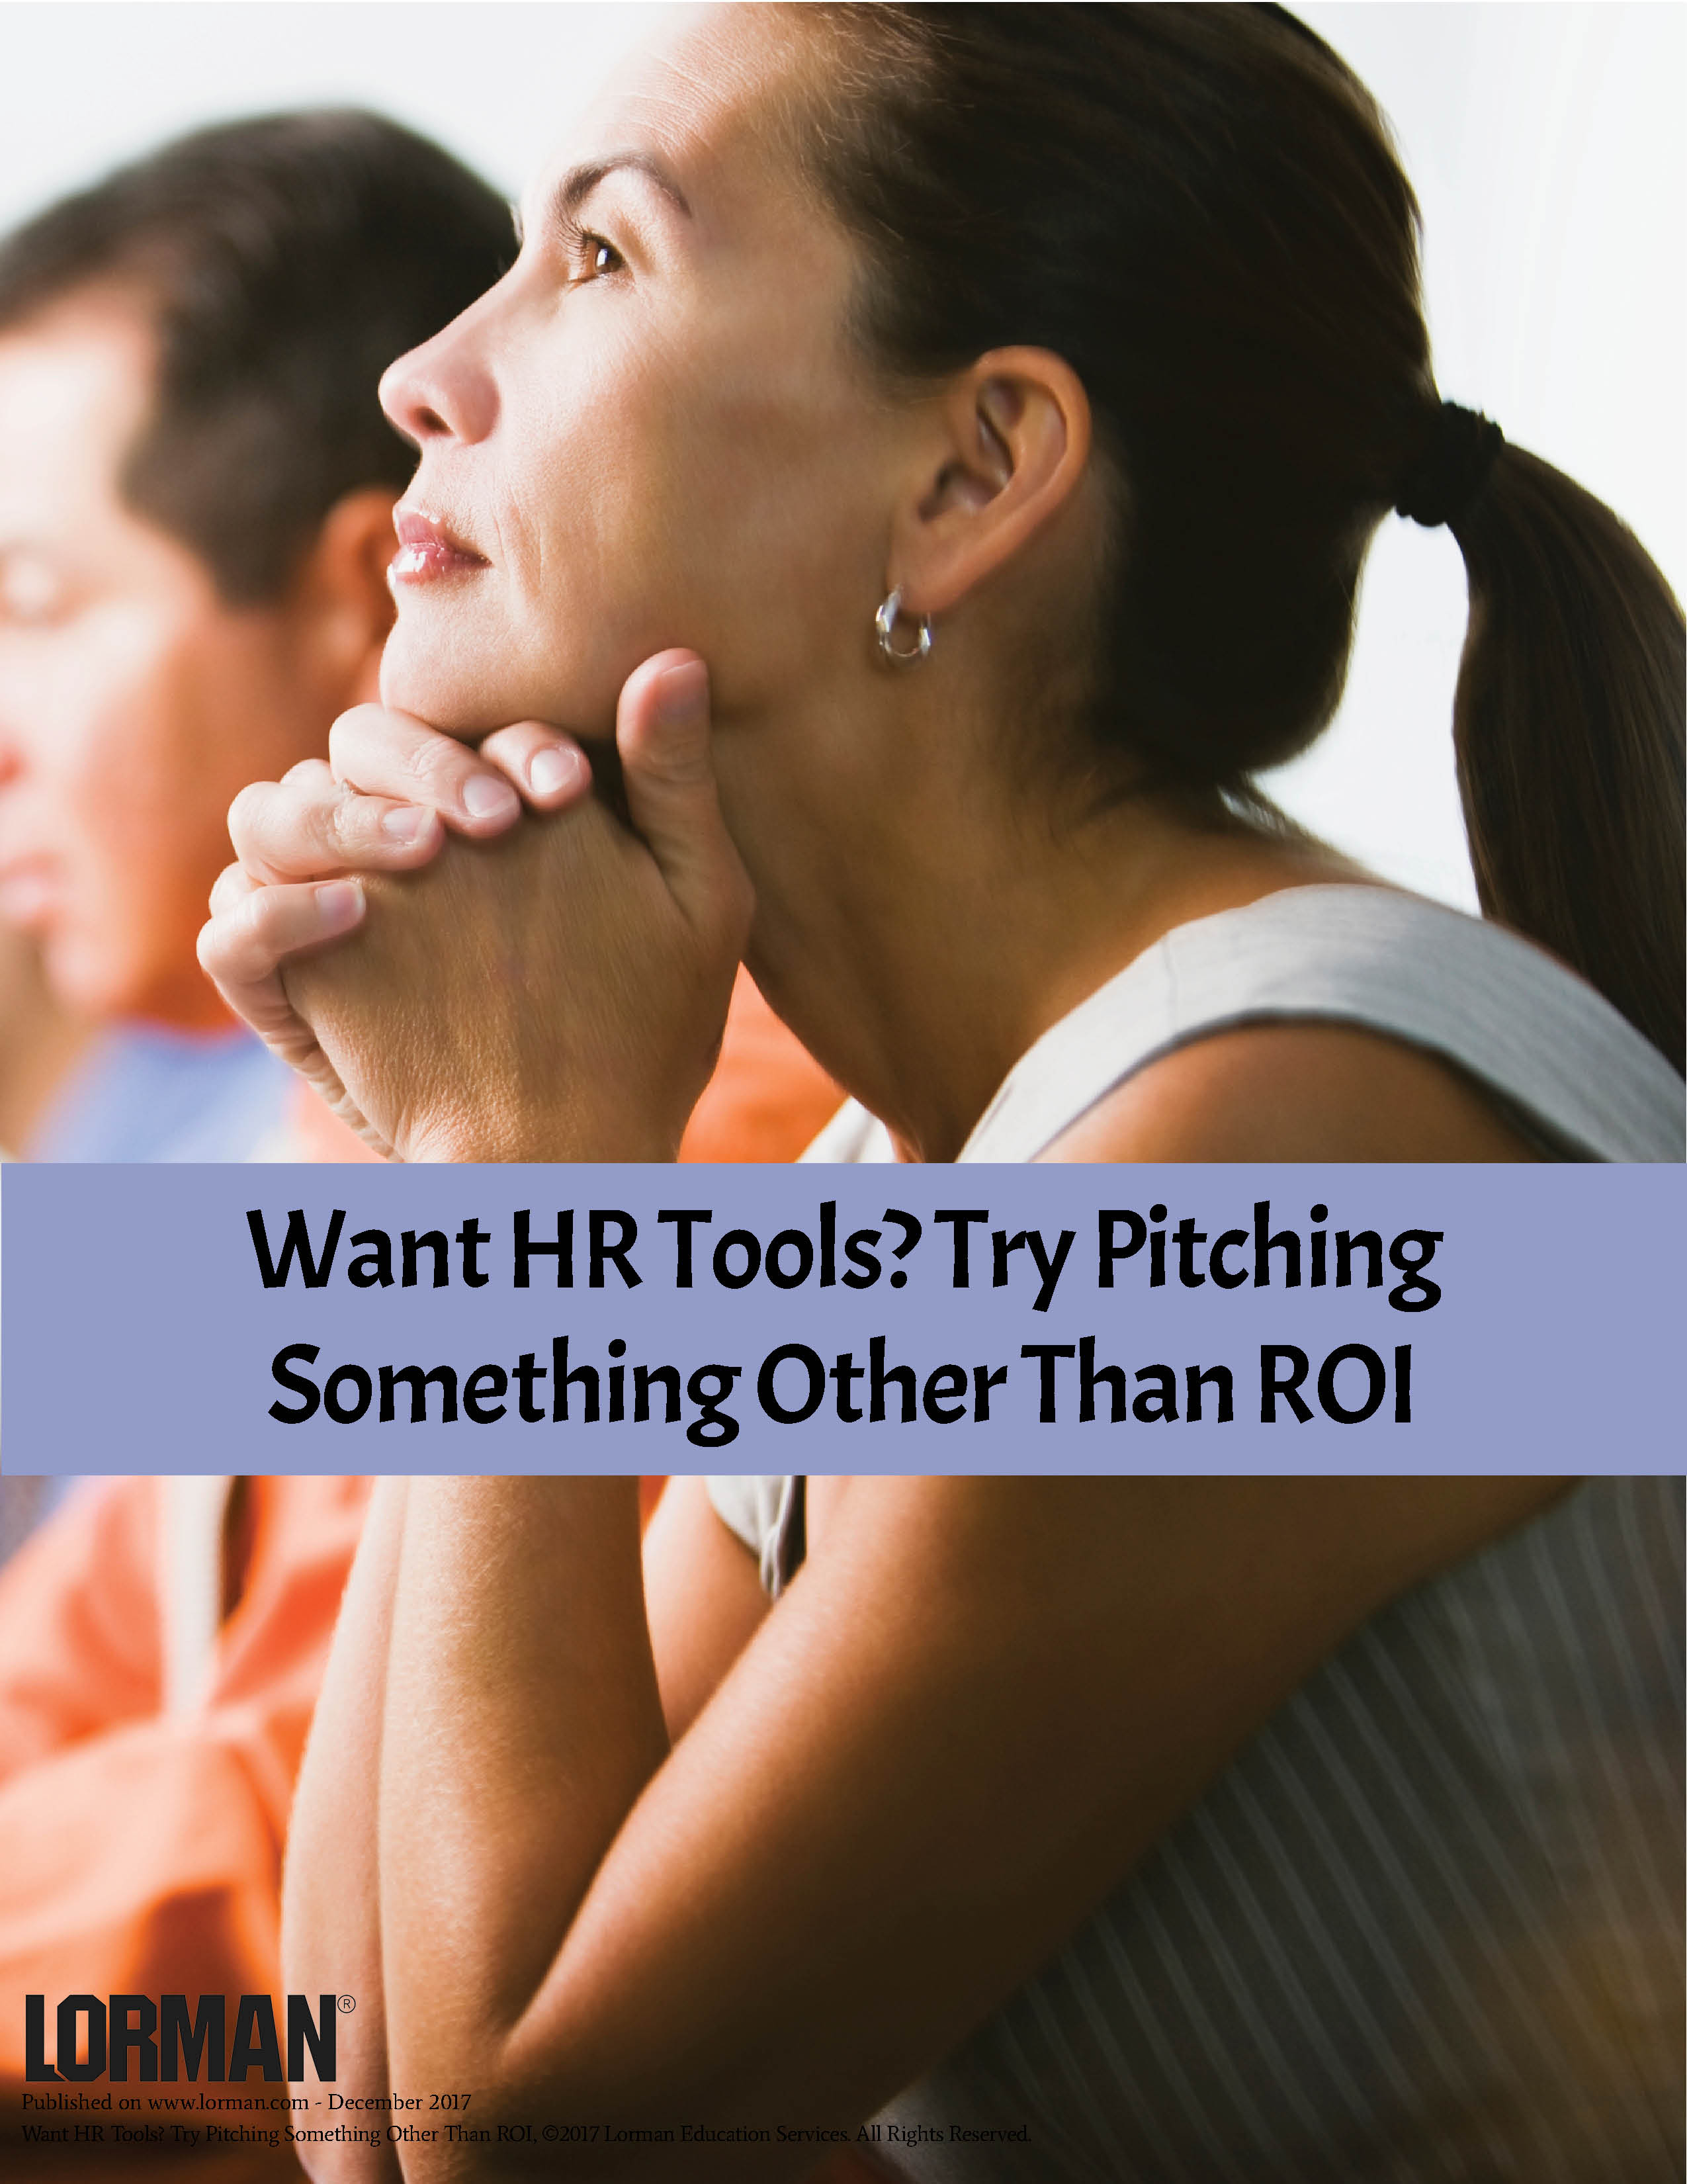 Want HR Tools? Try Pitching Something Other Than ROI